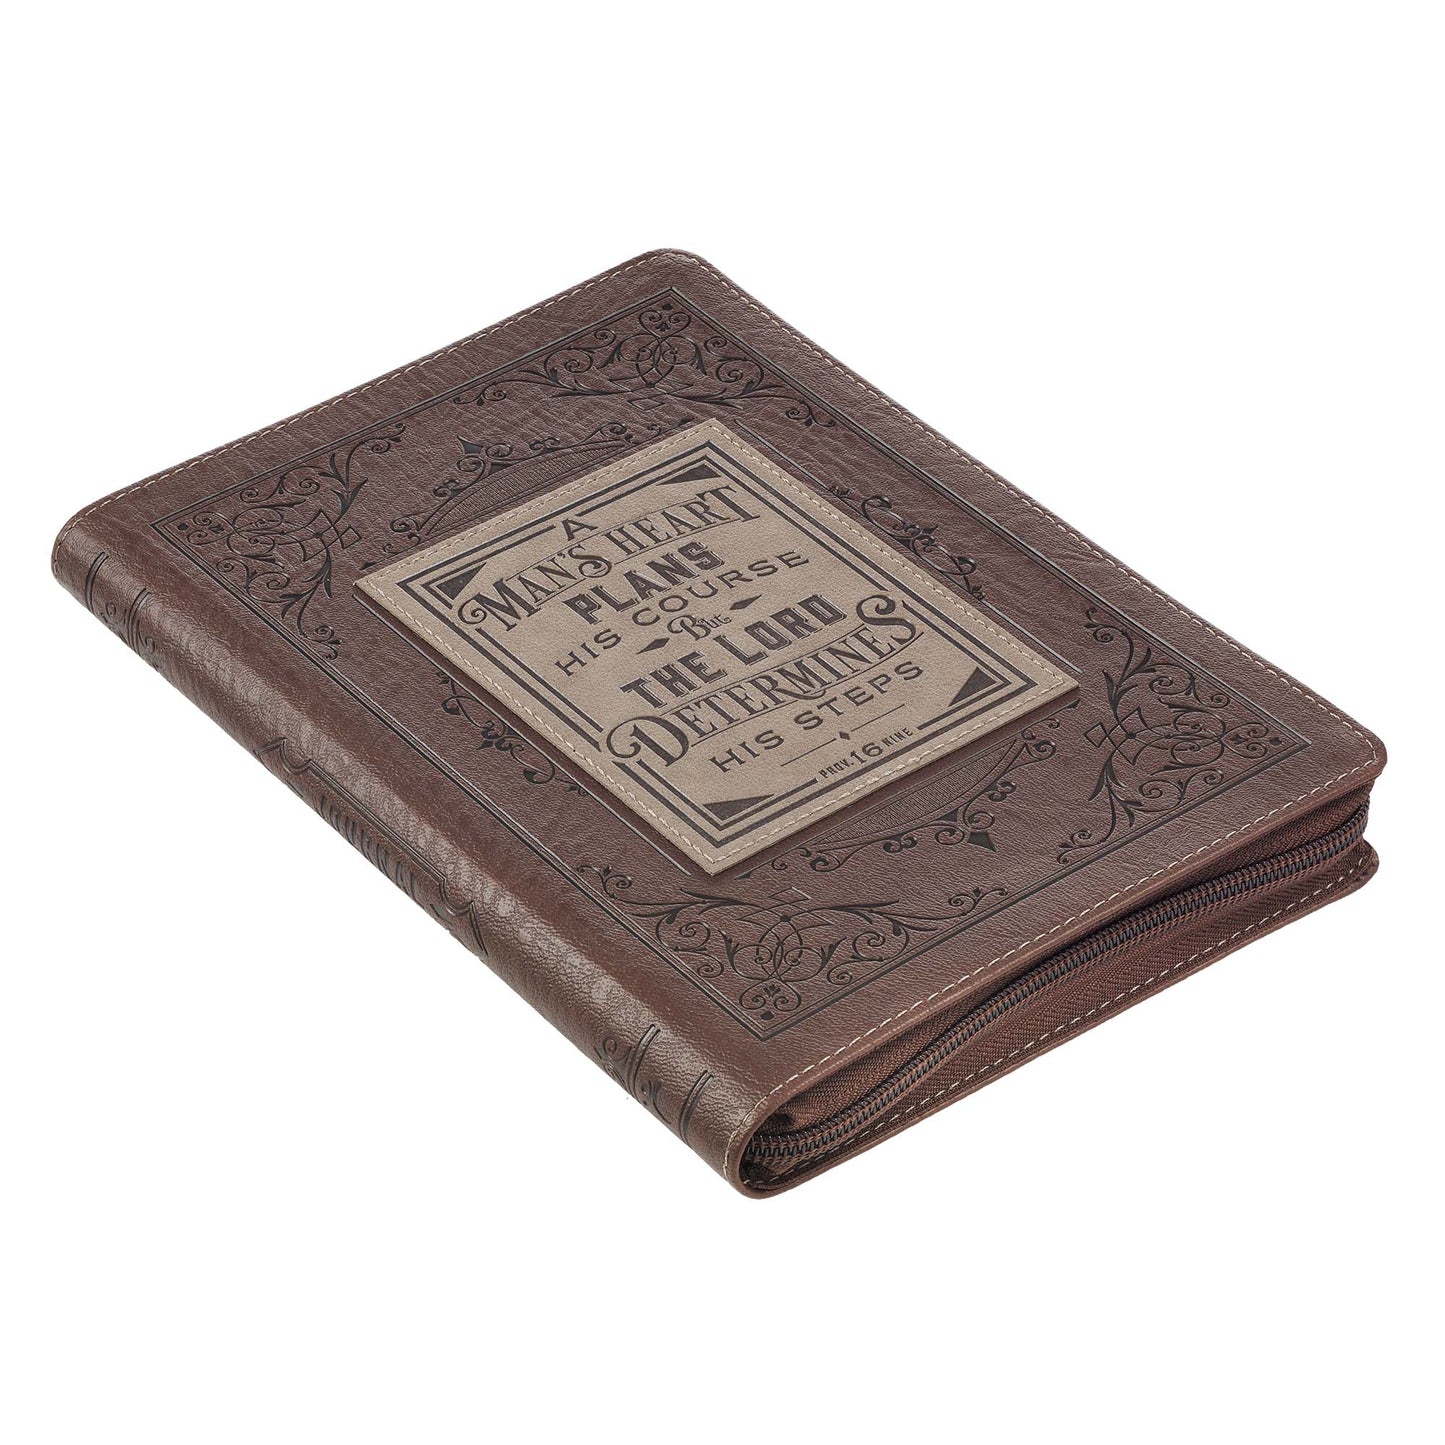 A Man's Heart Classic Faux Leather Zippered Journal in Brown - Proverbs 16:9 - The Christian Gift Company